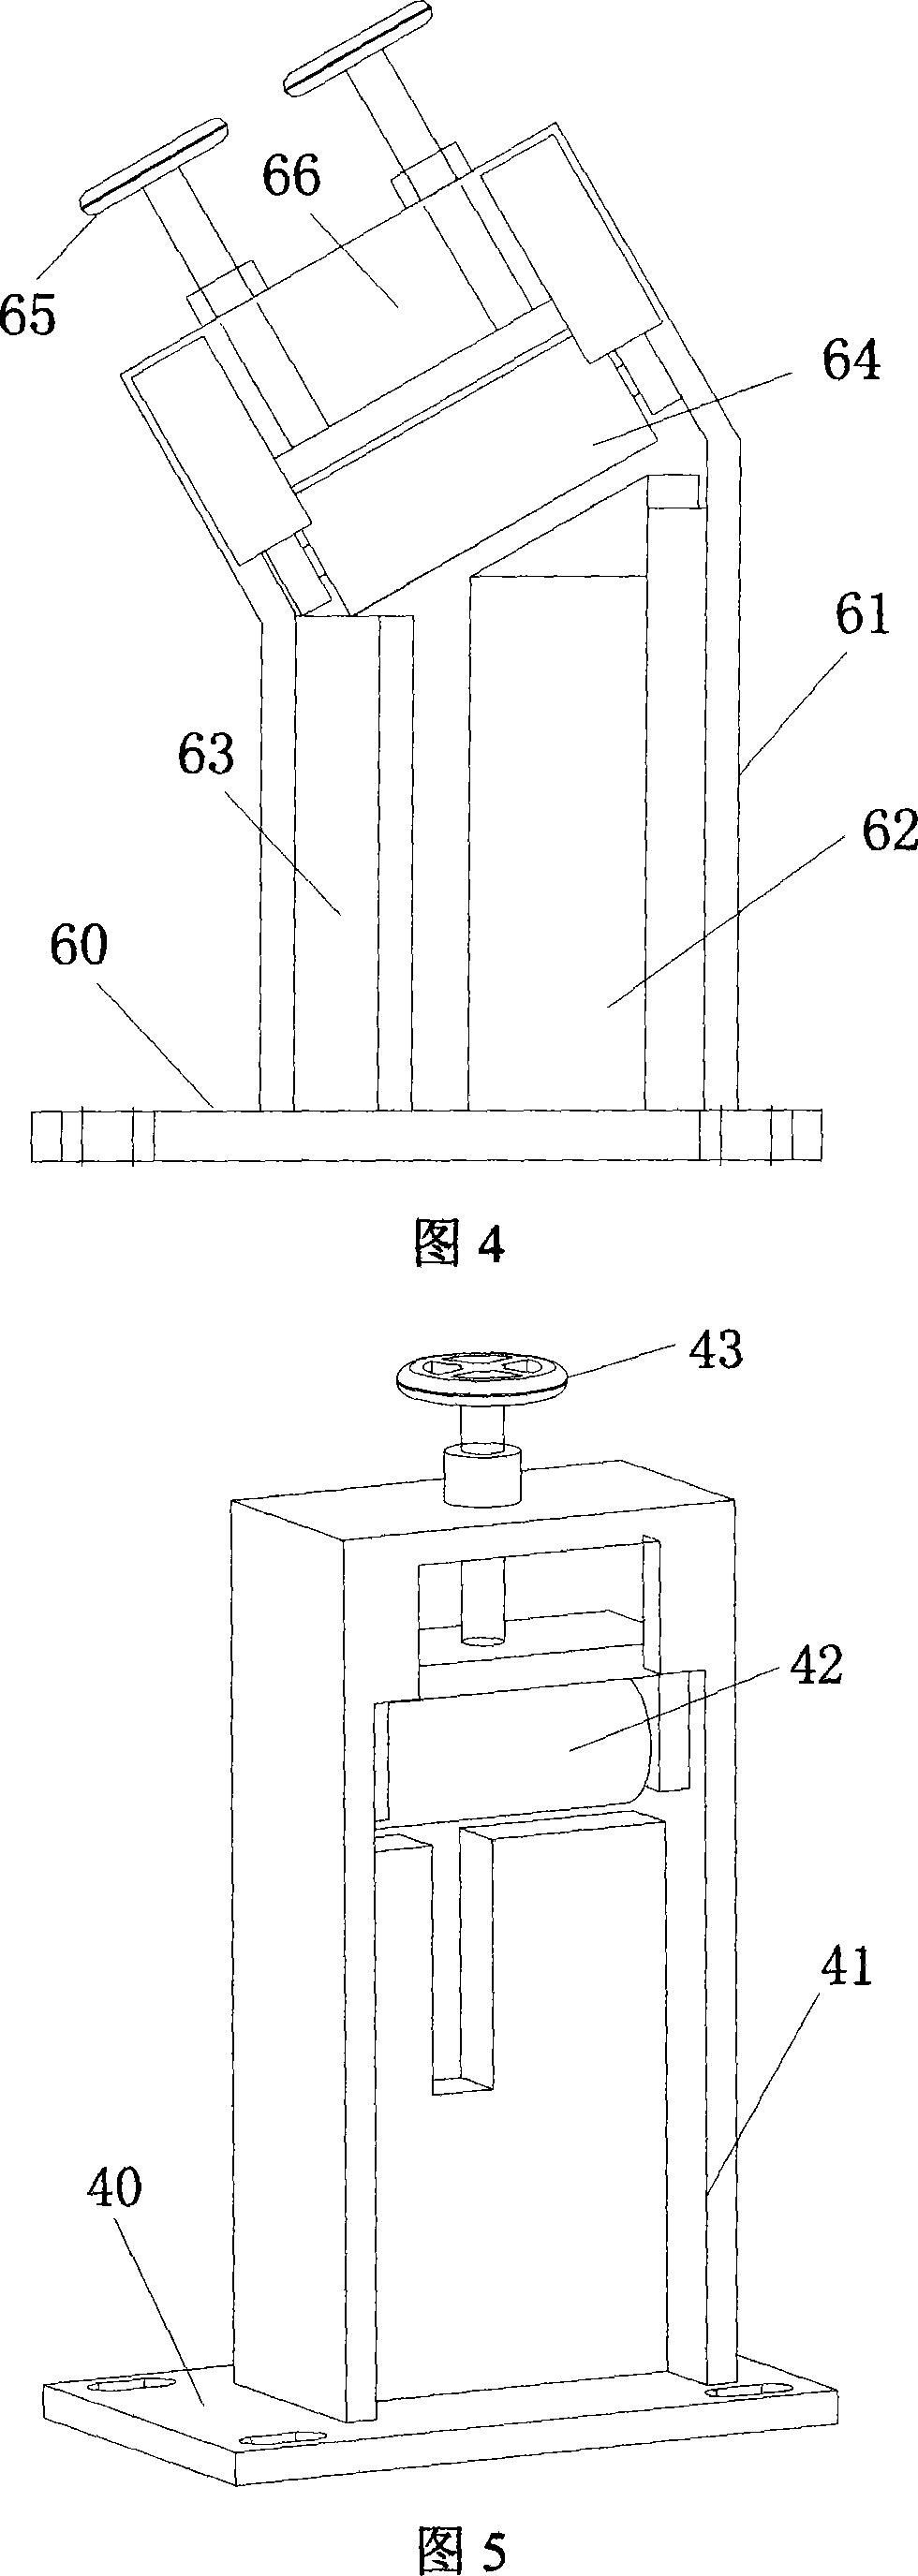 Method for forming edging angle steel connecting oil tank vault and wall plate and special-purpose equipment